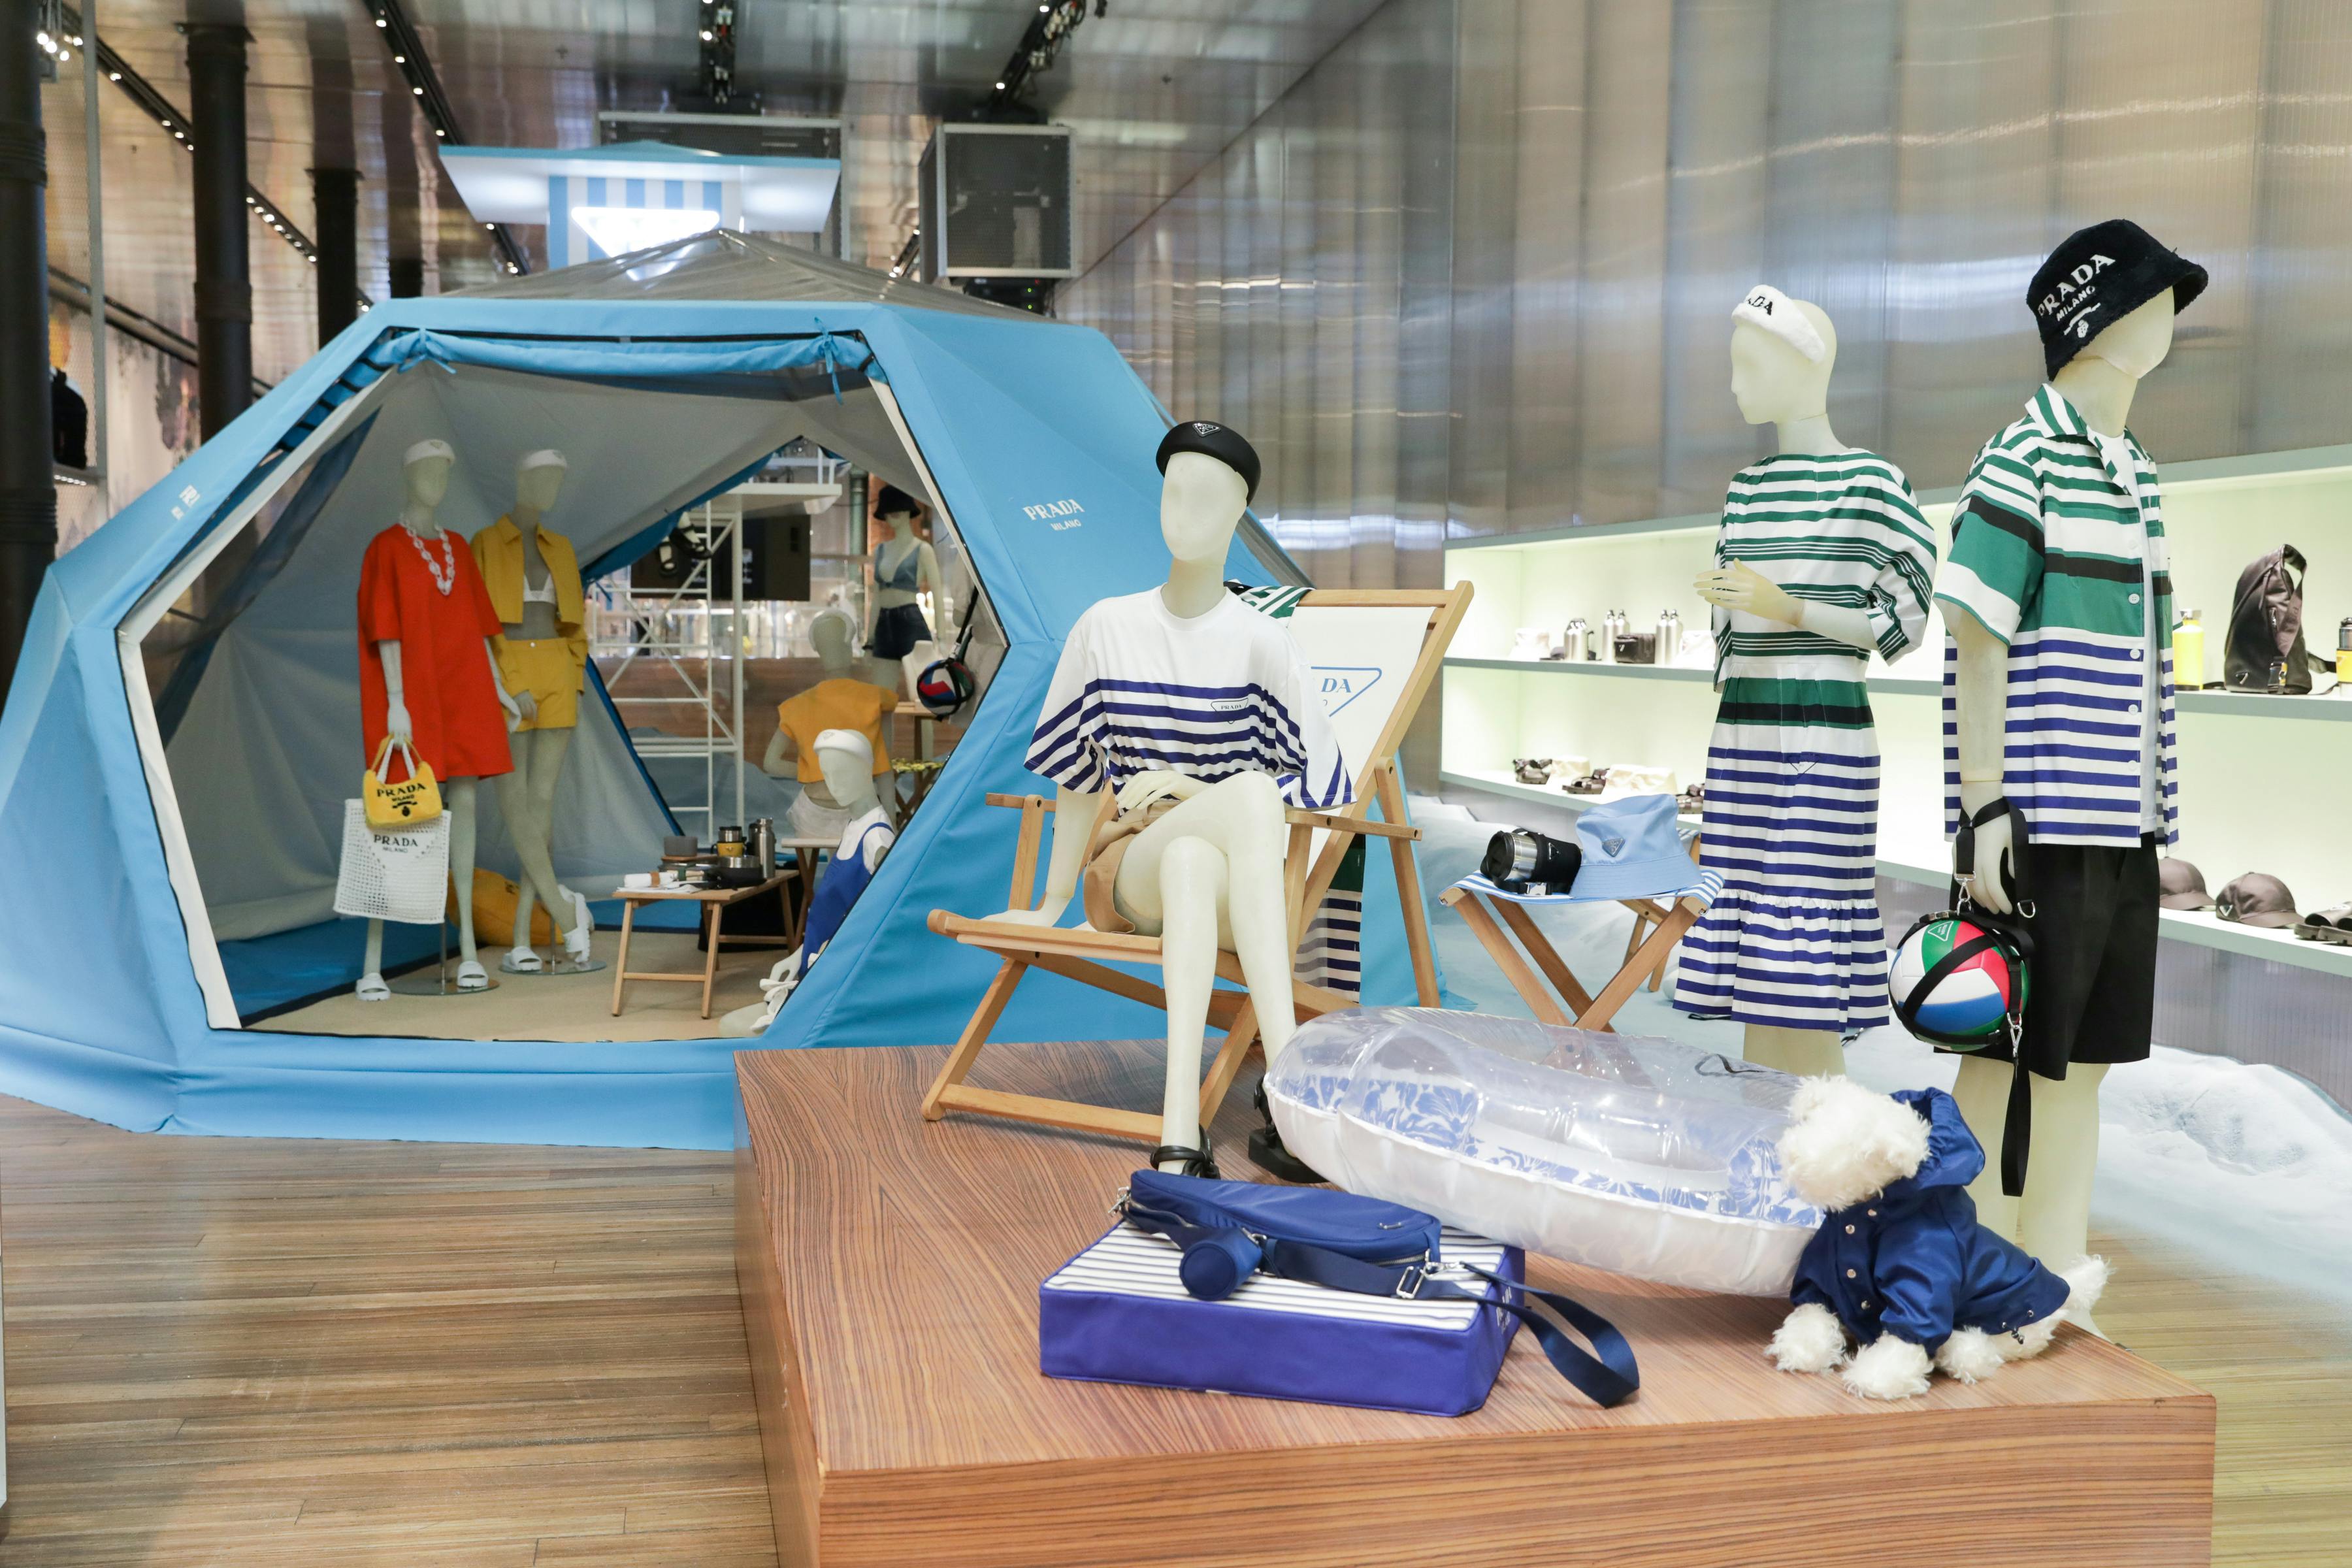 Prada Debuts Outdoor Collection with Beach-Themed Pop-Up in NYC Store -  Prada Coast 2021